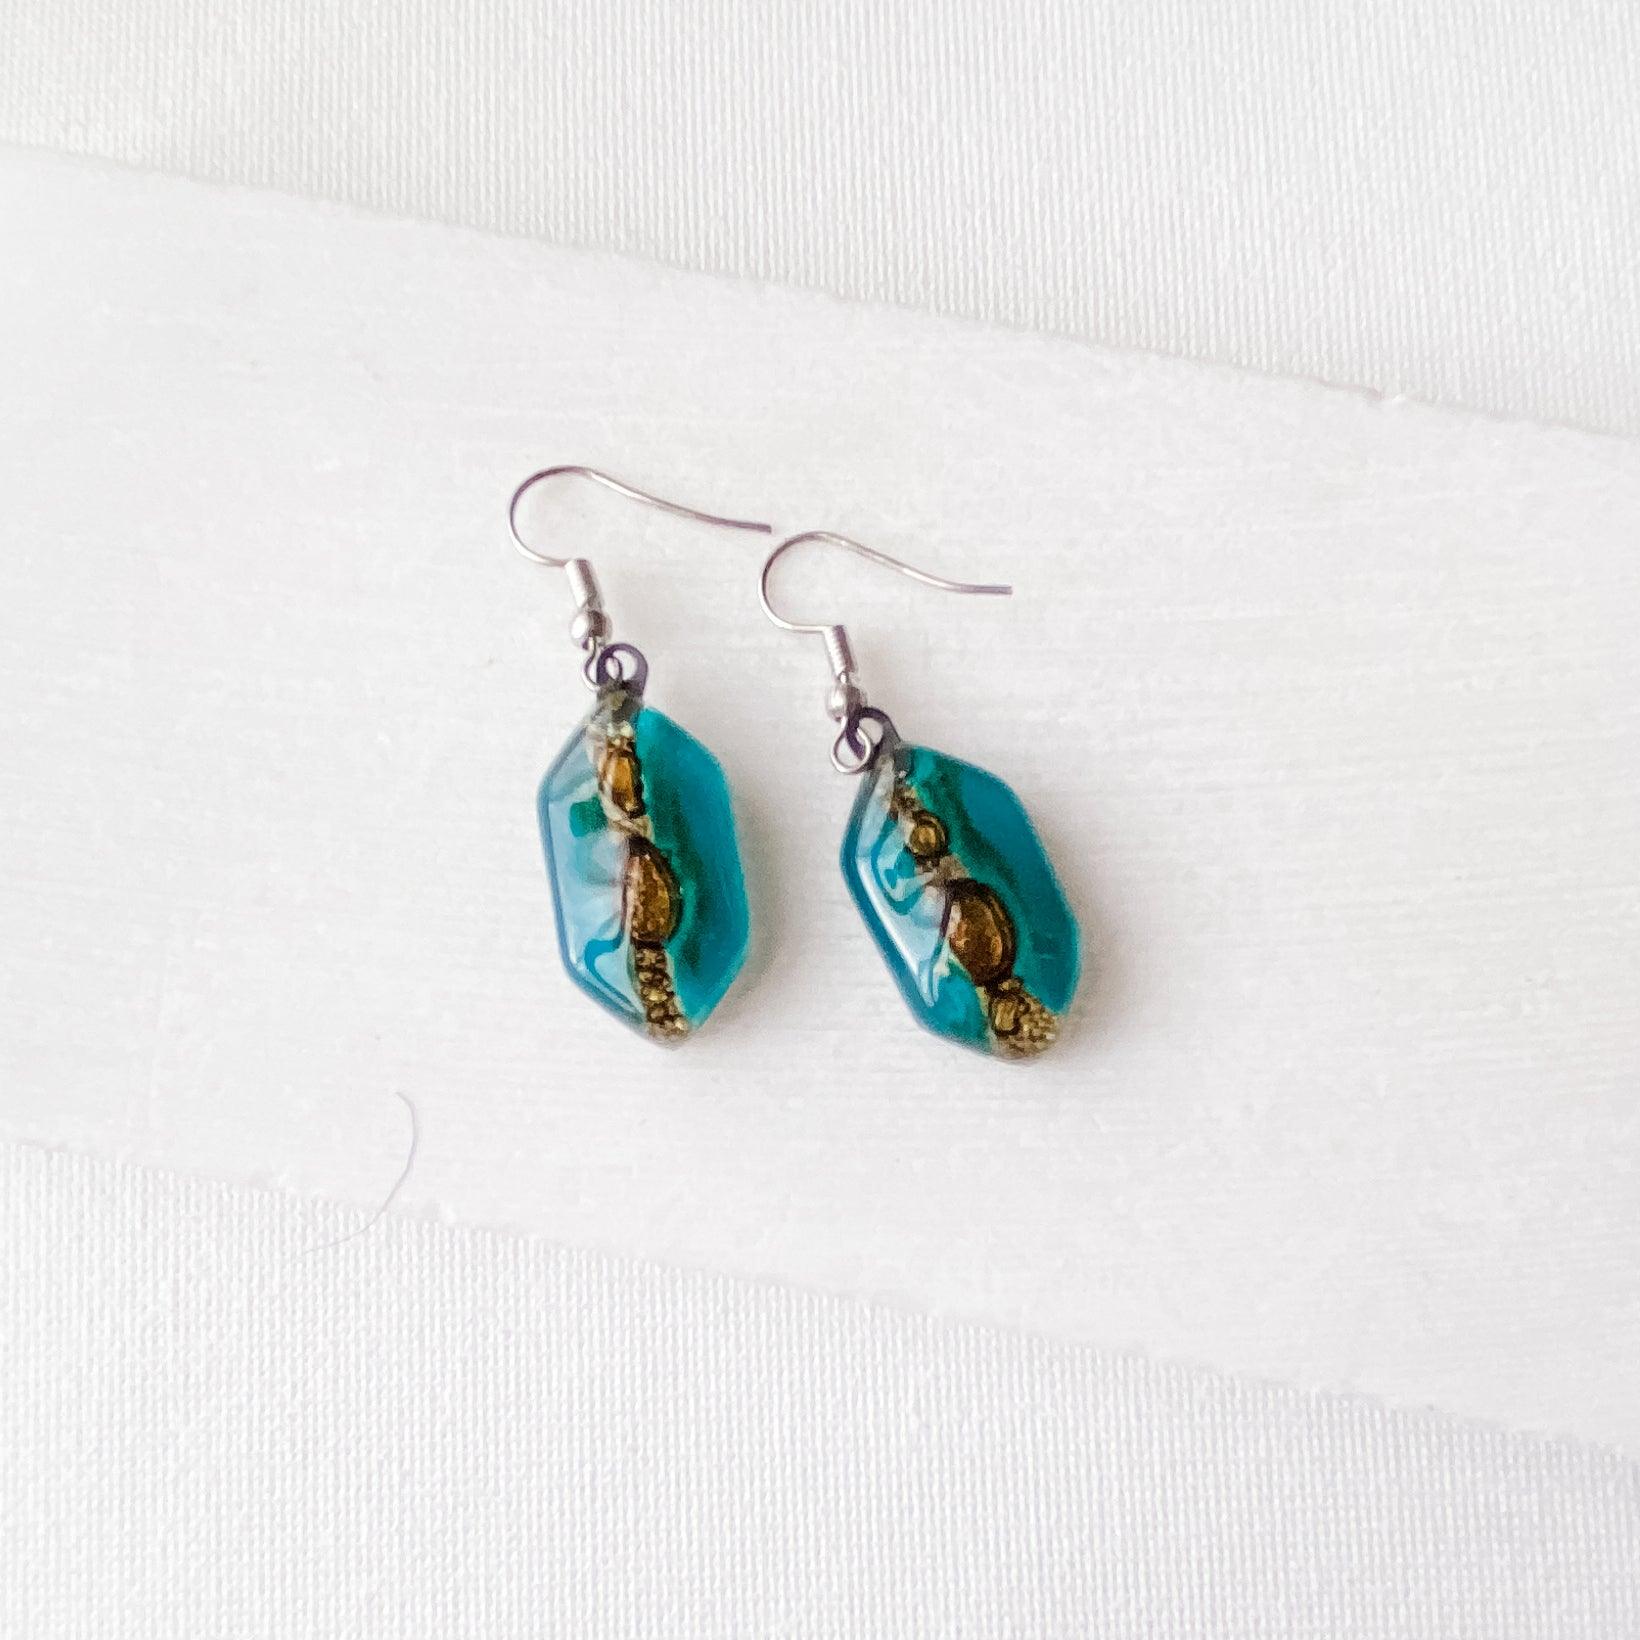 Recycled Fused Glass Earrings - Hexagons Uni-T